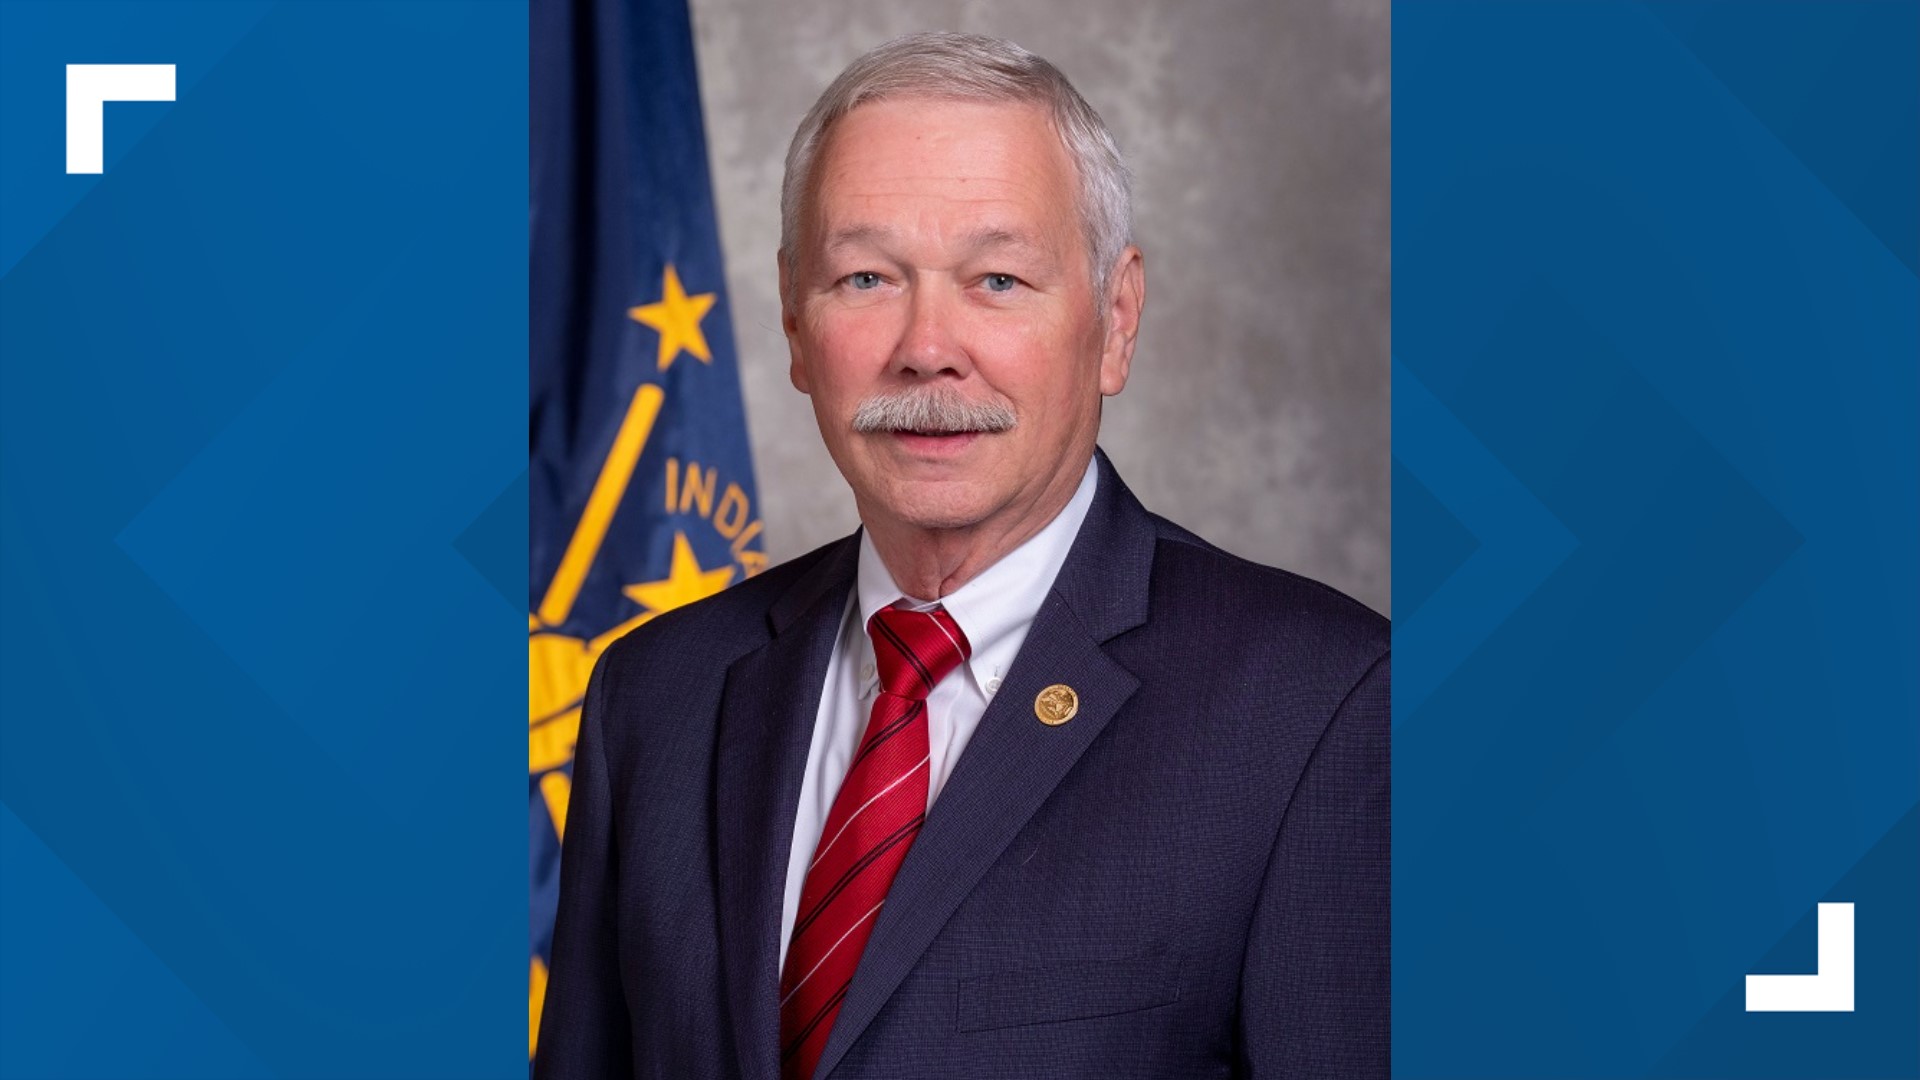 Sandlin was elected to the State Senate in 2016, representing the south side of Indianapolis and part of Johnson County.